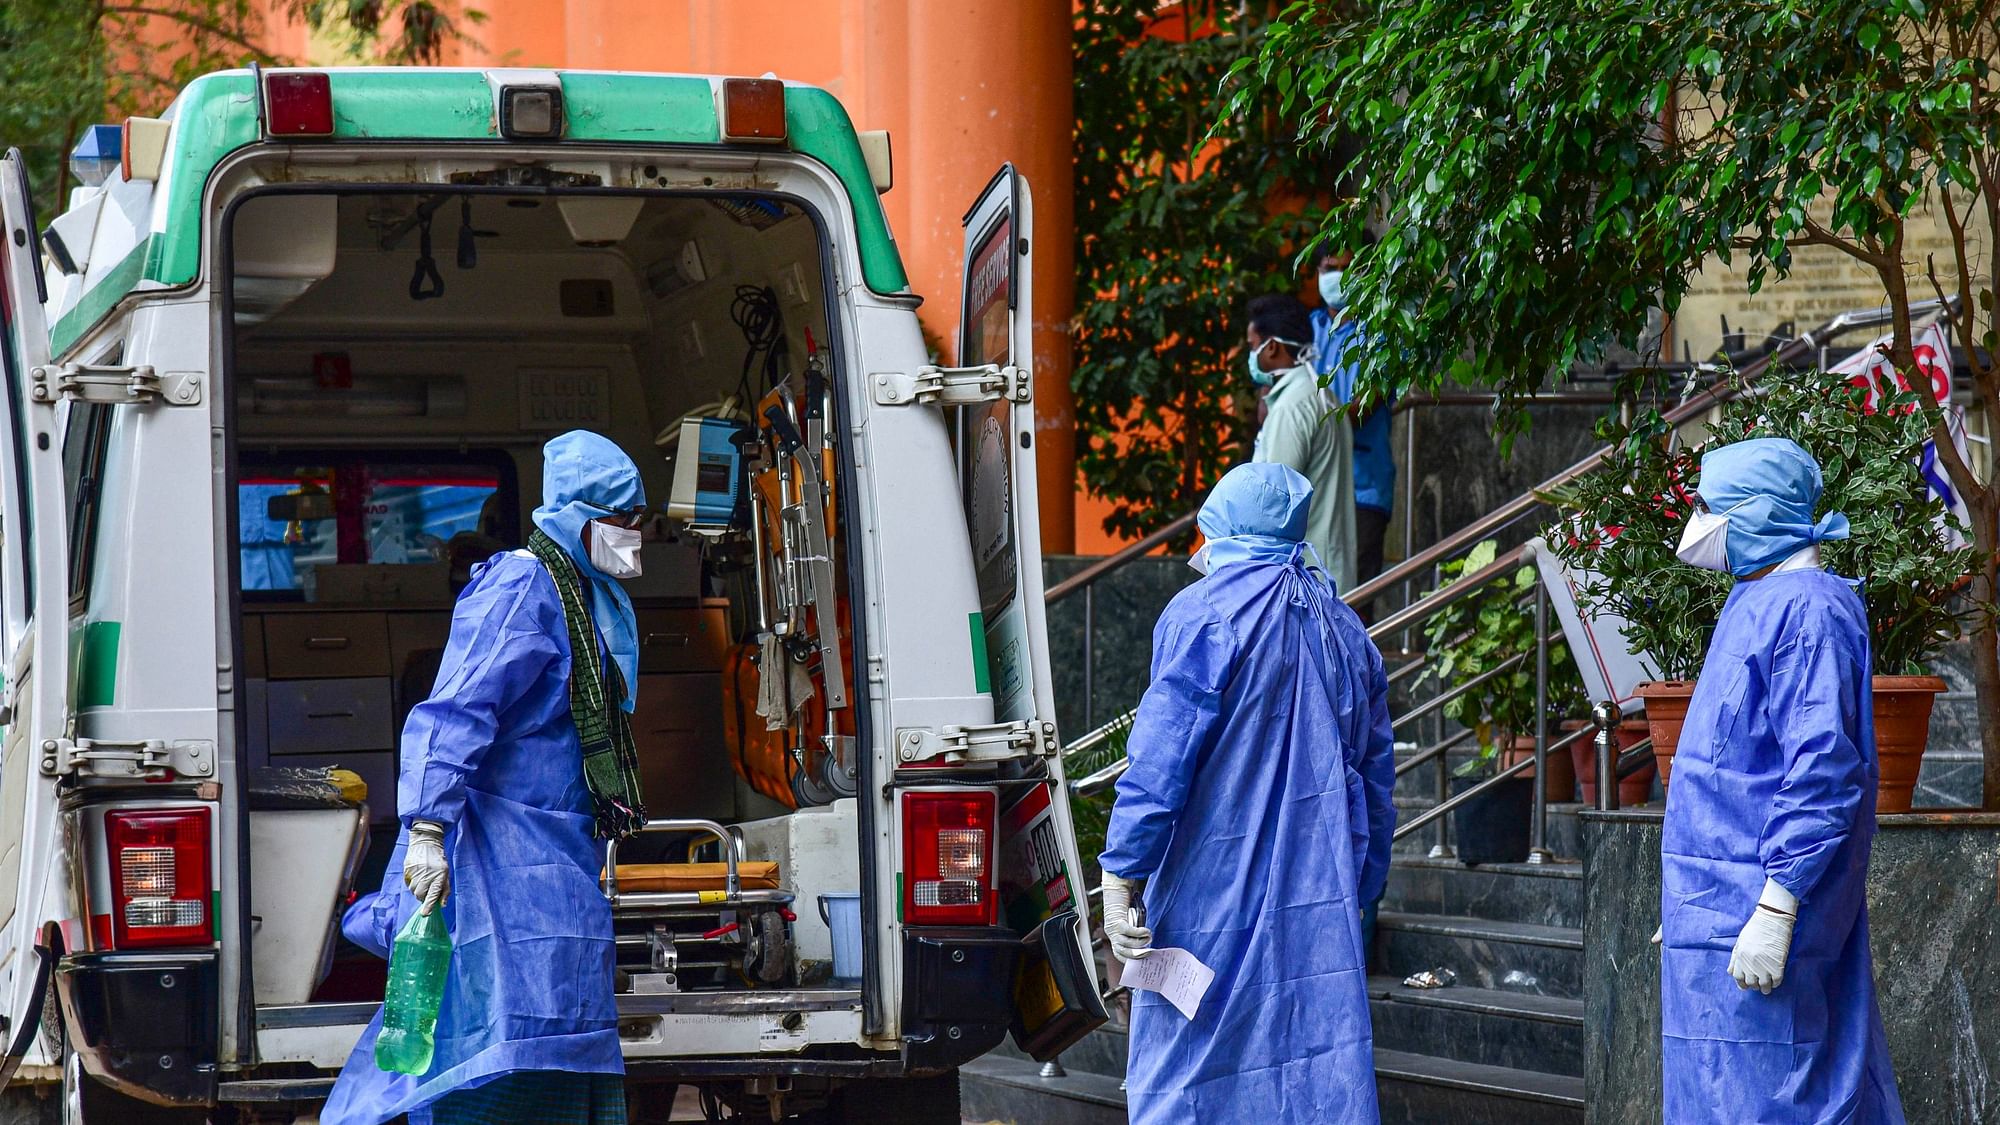 Medical workers attend to a suspected coronavirus patient. Image used for representation.